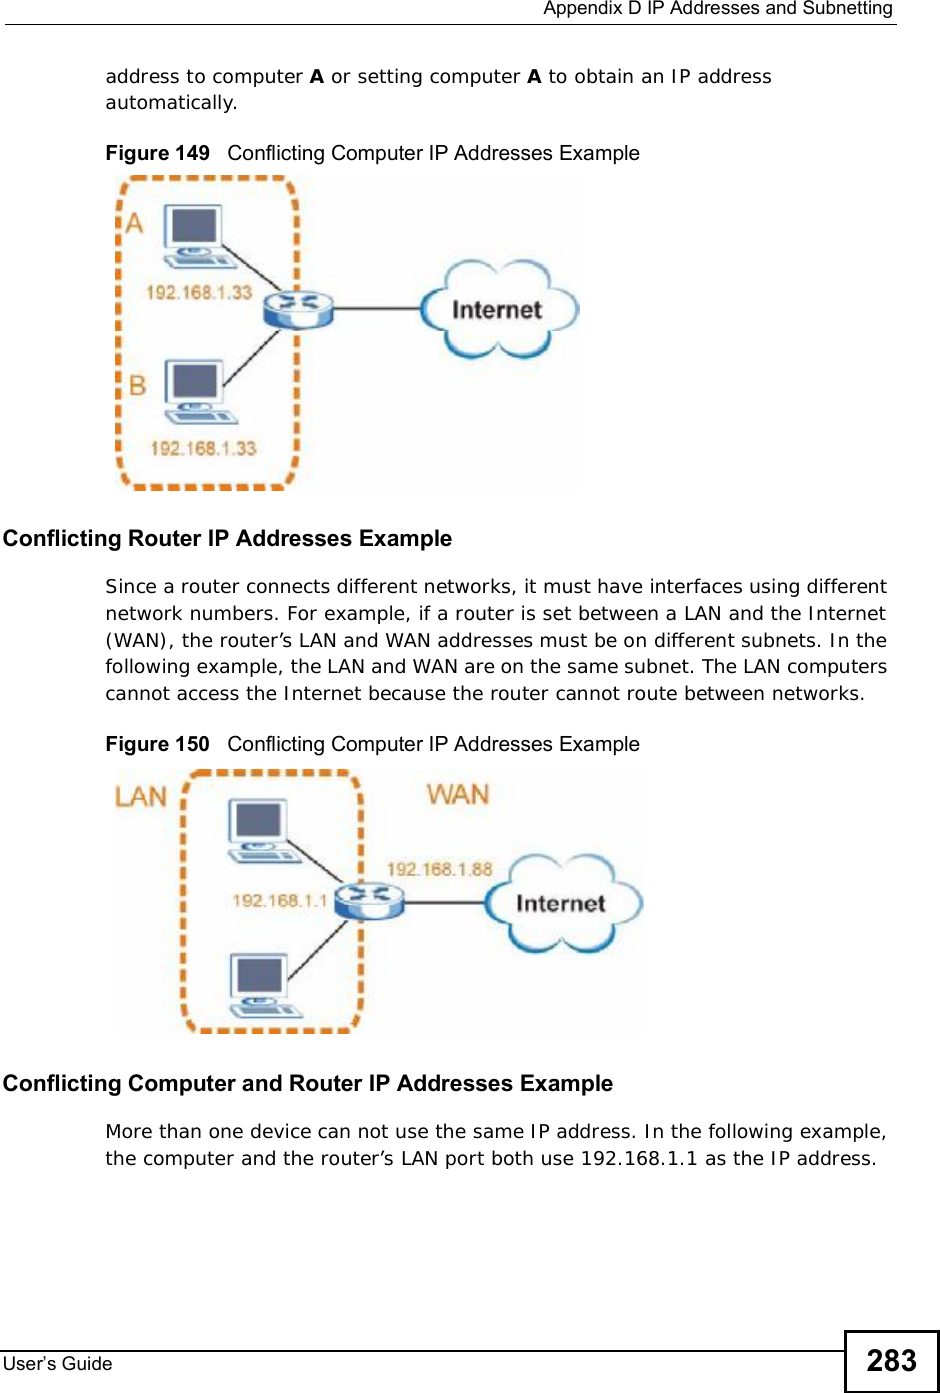  Appendix DIP Addresses and SubnettingUser s Guide 283address to computer A or setting computer A to obtain an IP address automatically.  Figure 149   Conflicting Computer IP Addresses ExampleConflicting Router IP Addresses ExampleSince a router connects different networks, it must have interfaces using different network numbers. For example, if a router is set between a LAN and the Internet (WAN), the router’s LAN and WAN addresses must be on different subnets. In the following example, the LAN and WAN are on the same subnet. The LAN computers cannot access the Internet because the router cannot route between networks.Figure 150   Conflicting Computer IP Addresses ExampleConflicting Computer and Router IP Addresses ExampleMore than one device can not use the same IP address. In the following example, the computer and the router’s LAN port both use 192.168.1.1 as the IP address. 